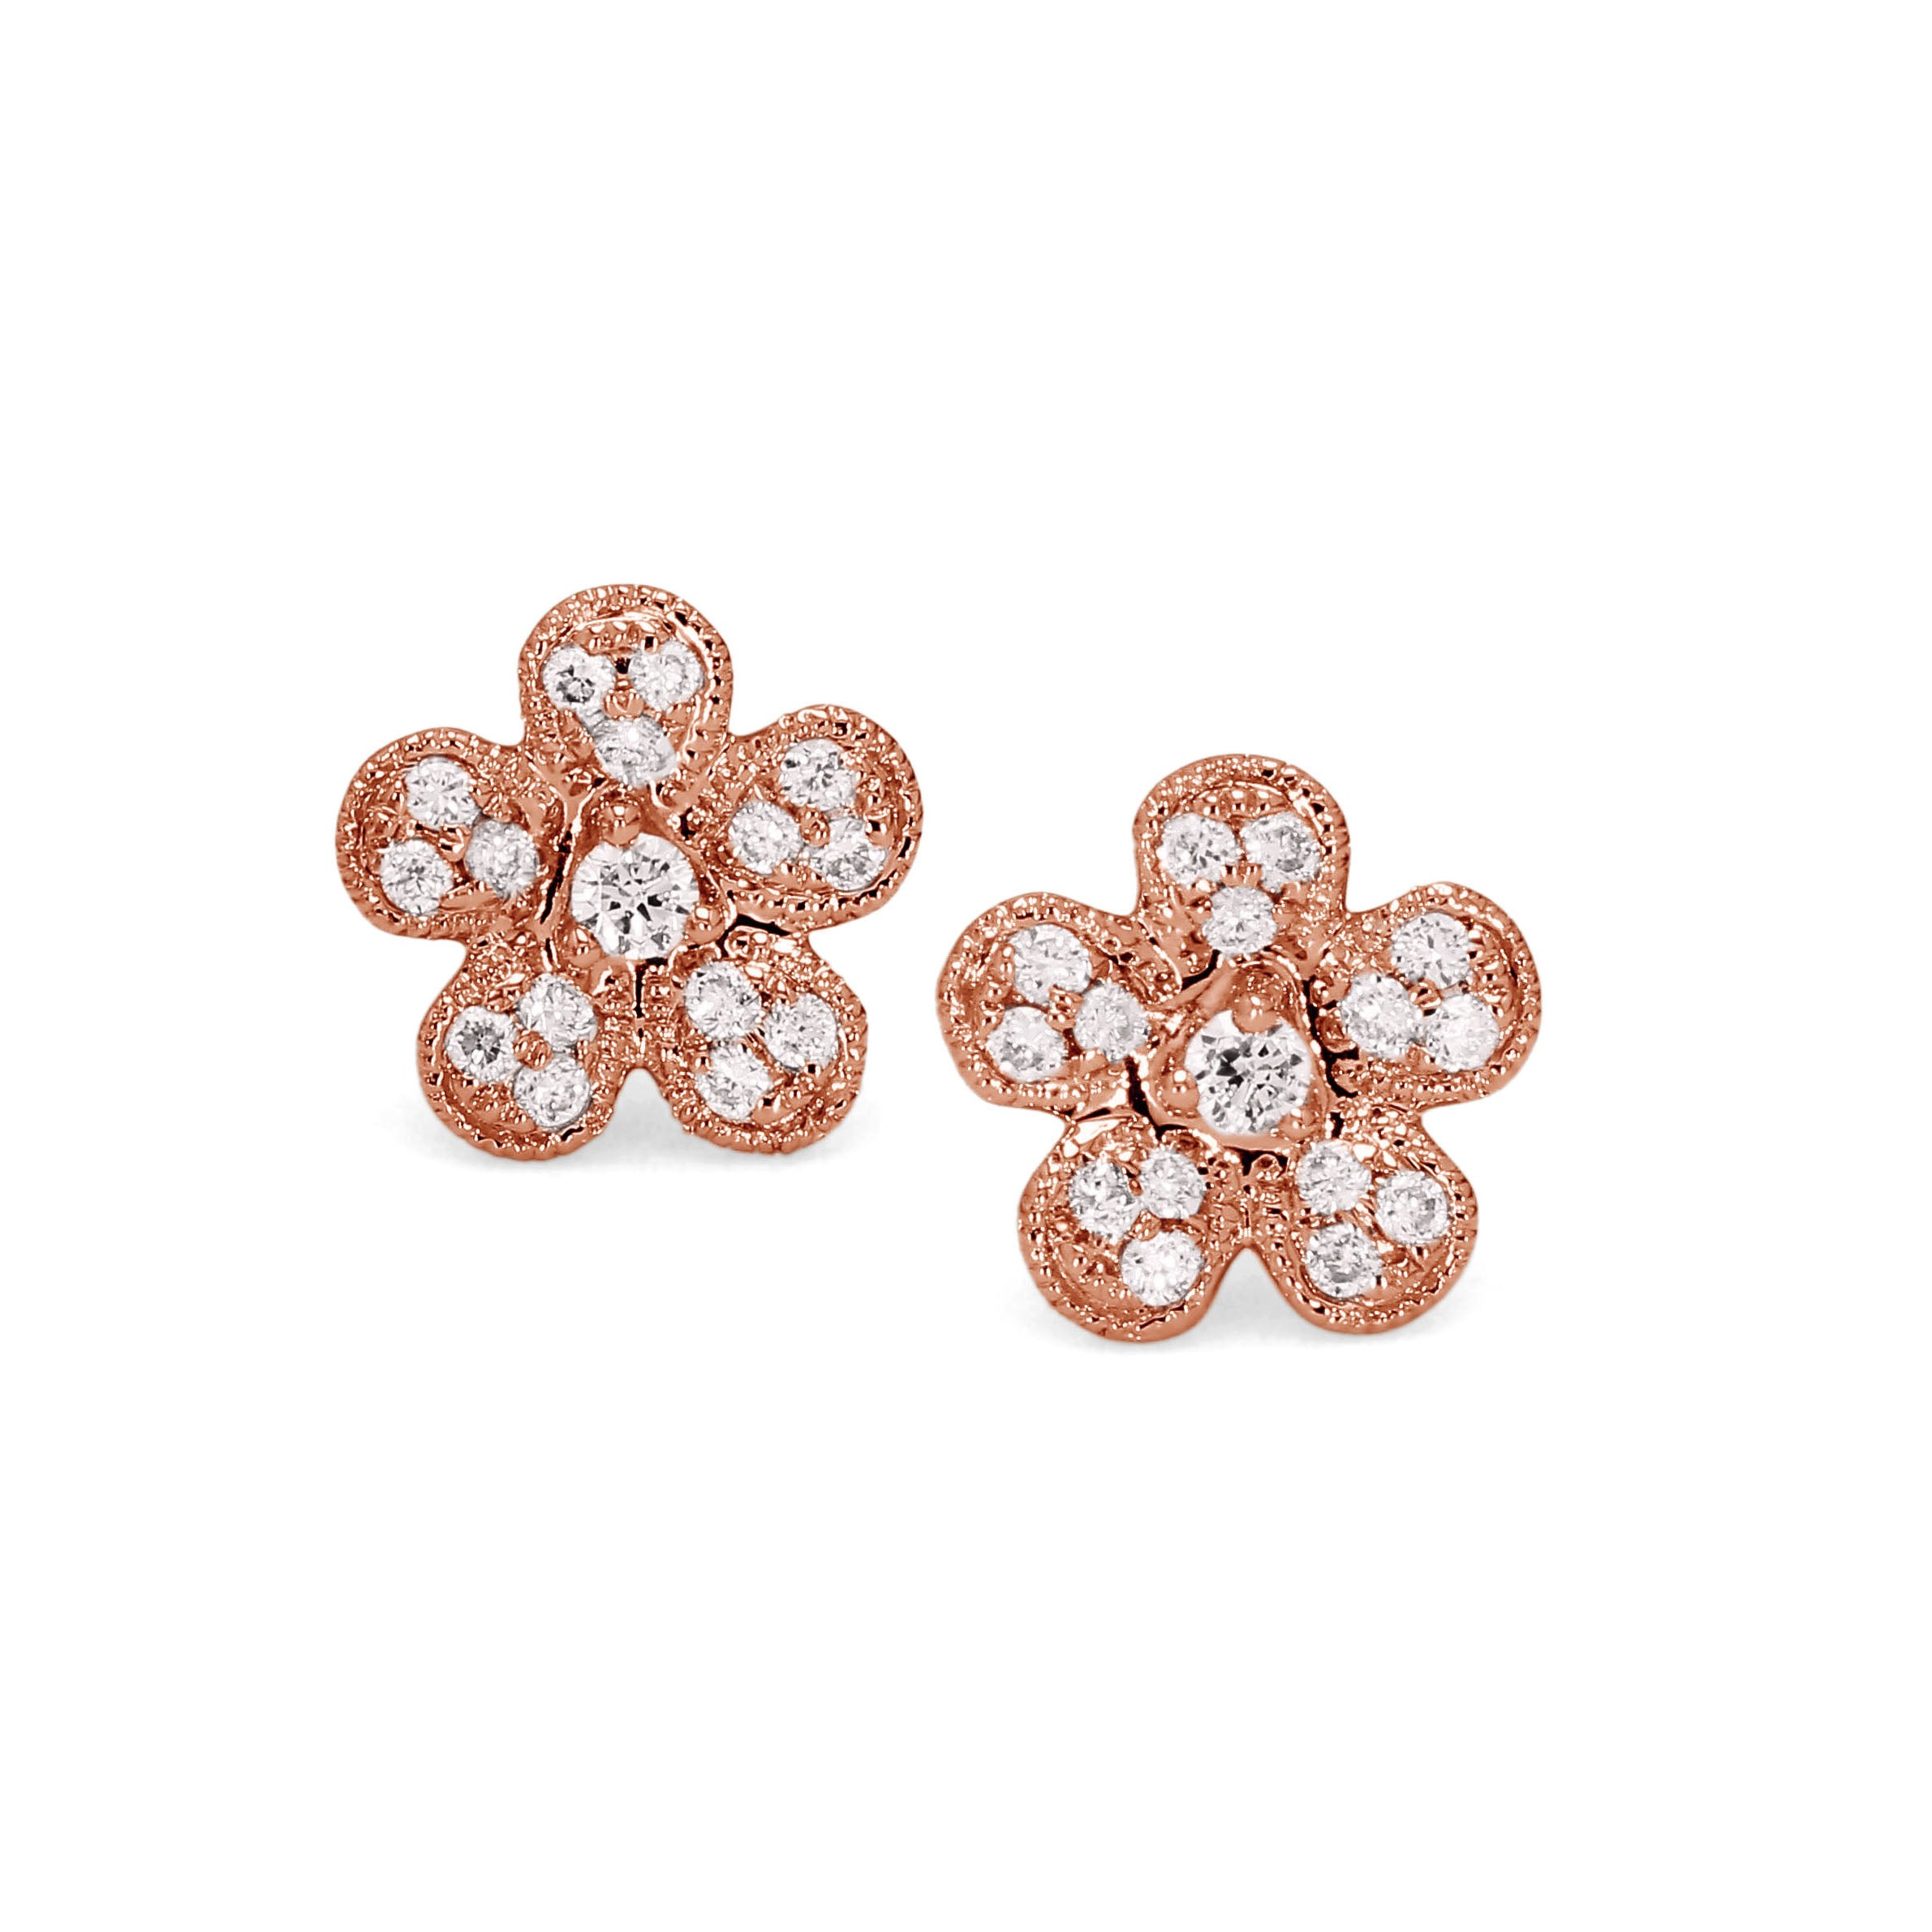 Adamar Jewels Cherry Blossom Earstuds in 18K rose gold set with diamonds